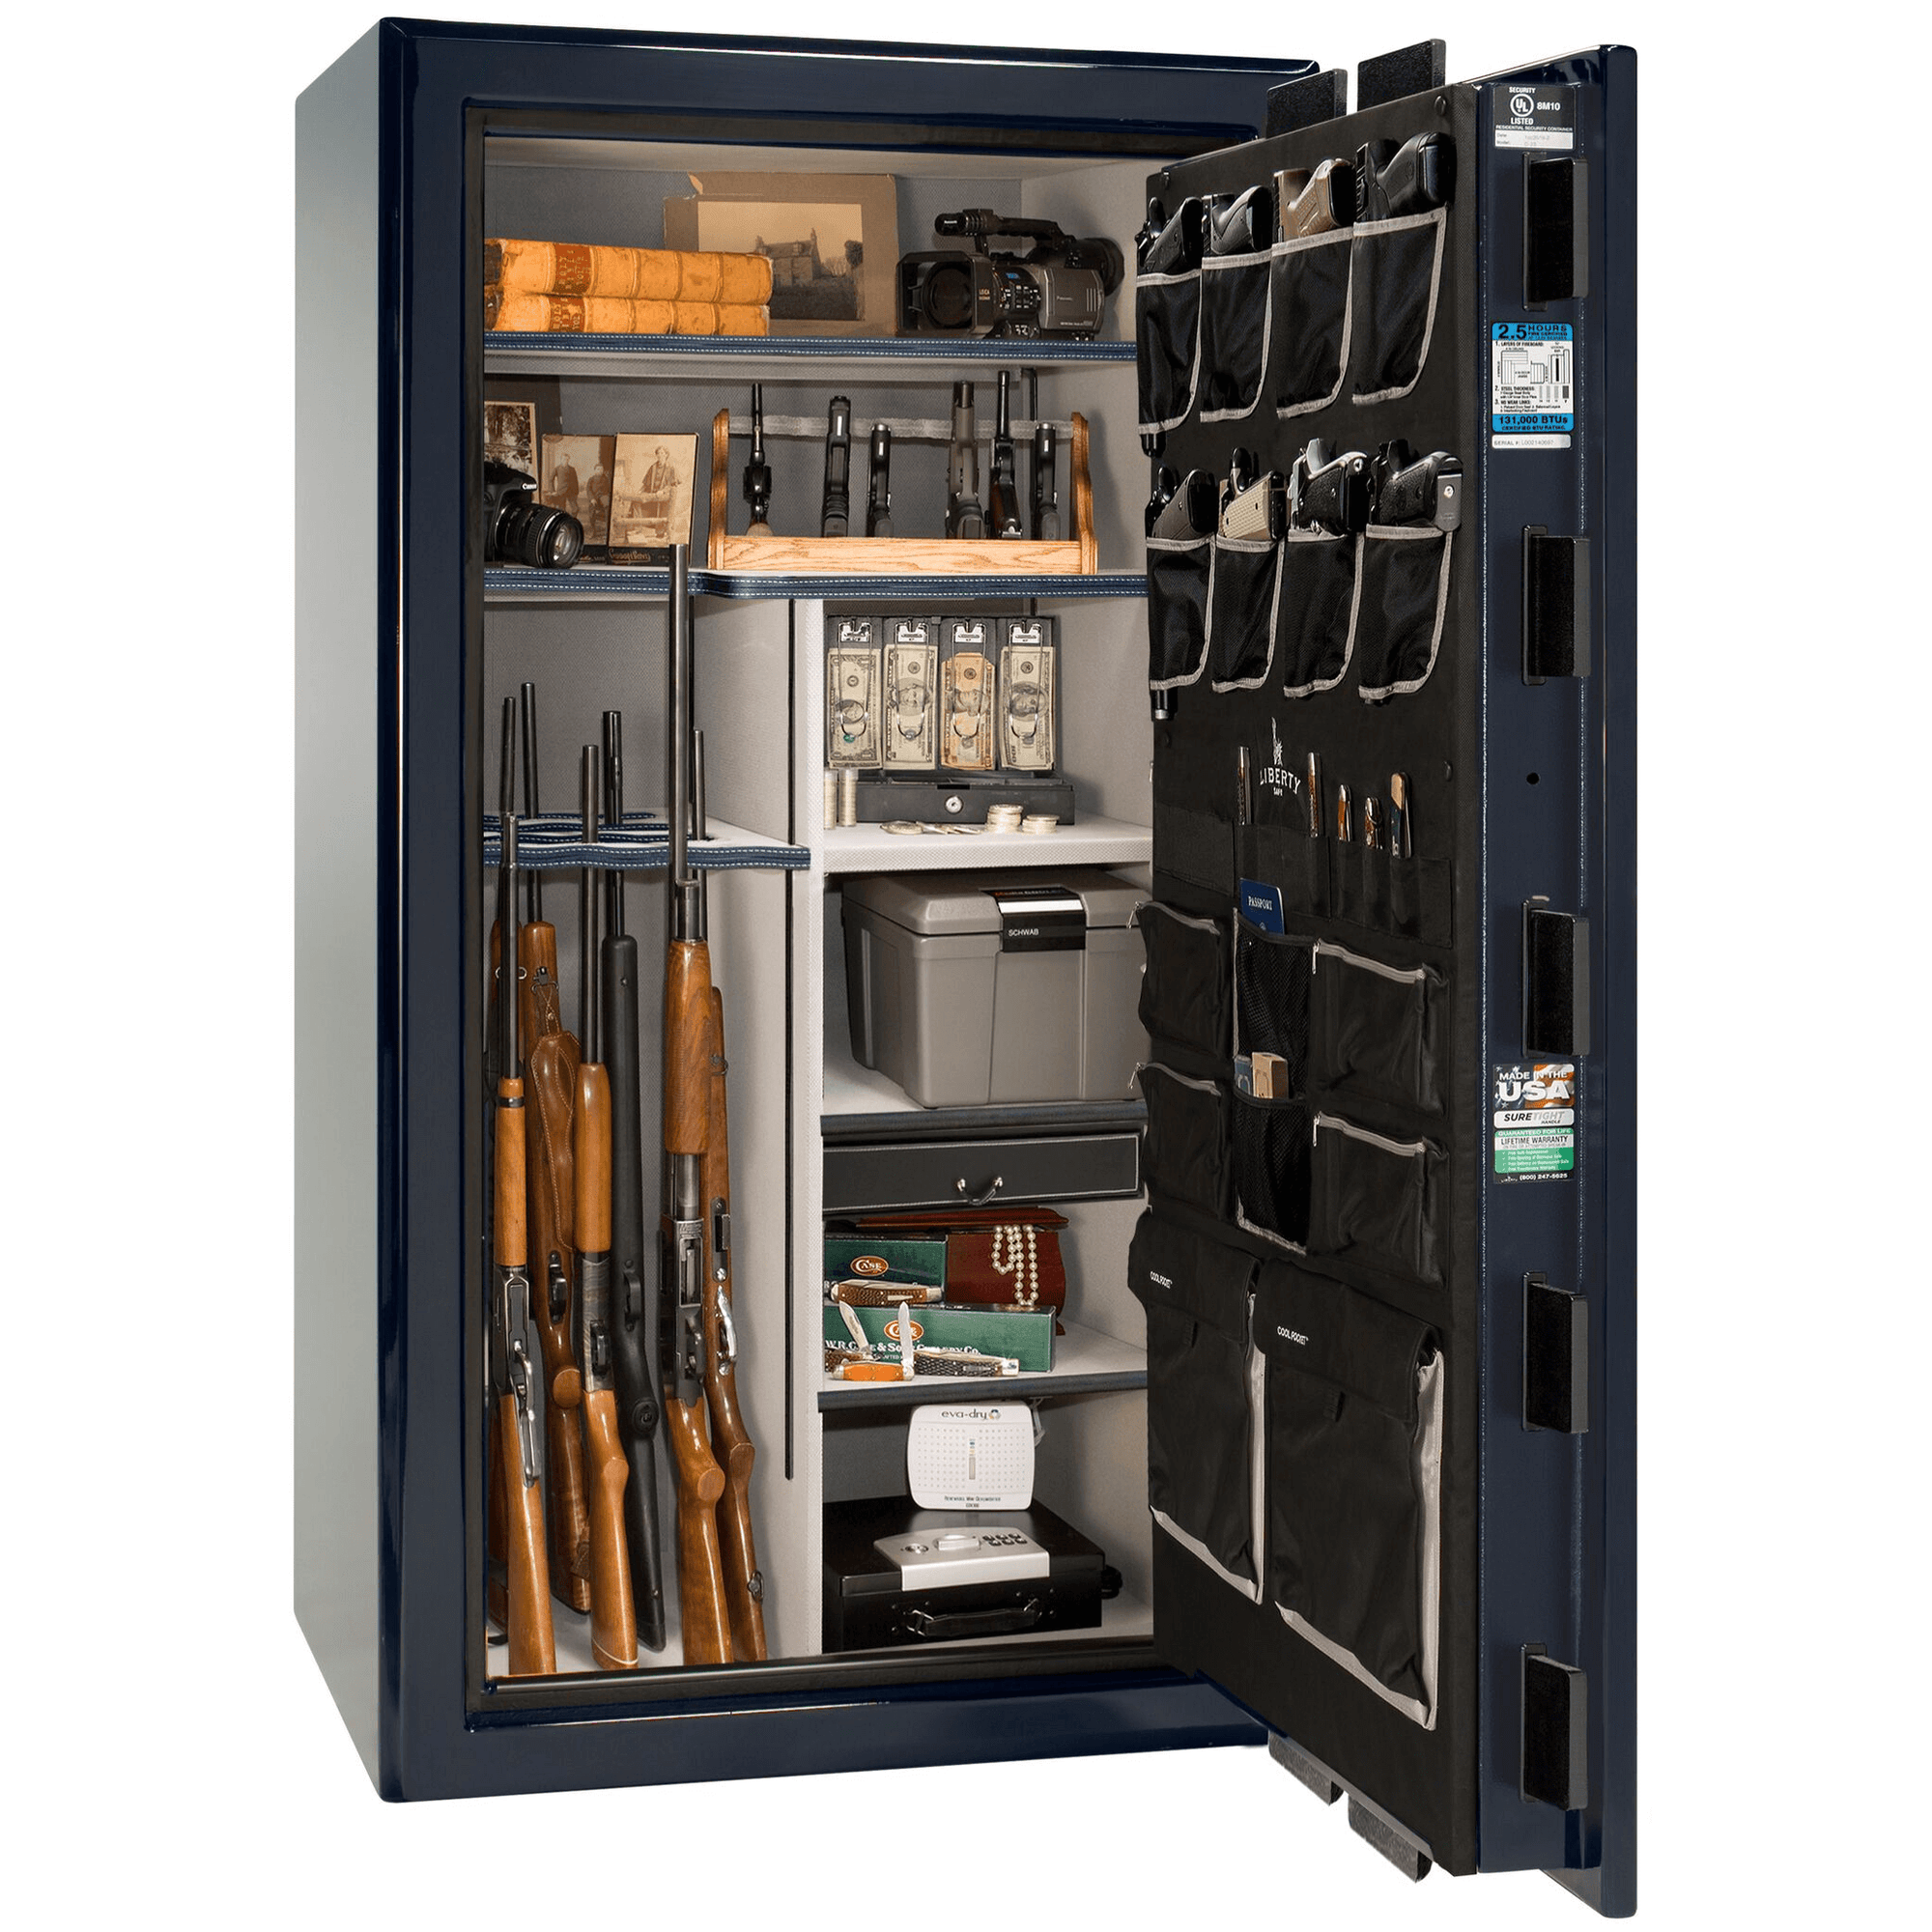 Presidential | 40 | Level 8 Security | 150 Minute Fire Protection | Blue Gloss | Chrome Electronic Lock | 65.5"(H) x 36"(W) x 32"(D)